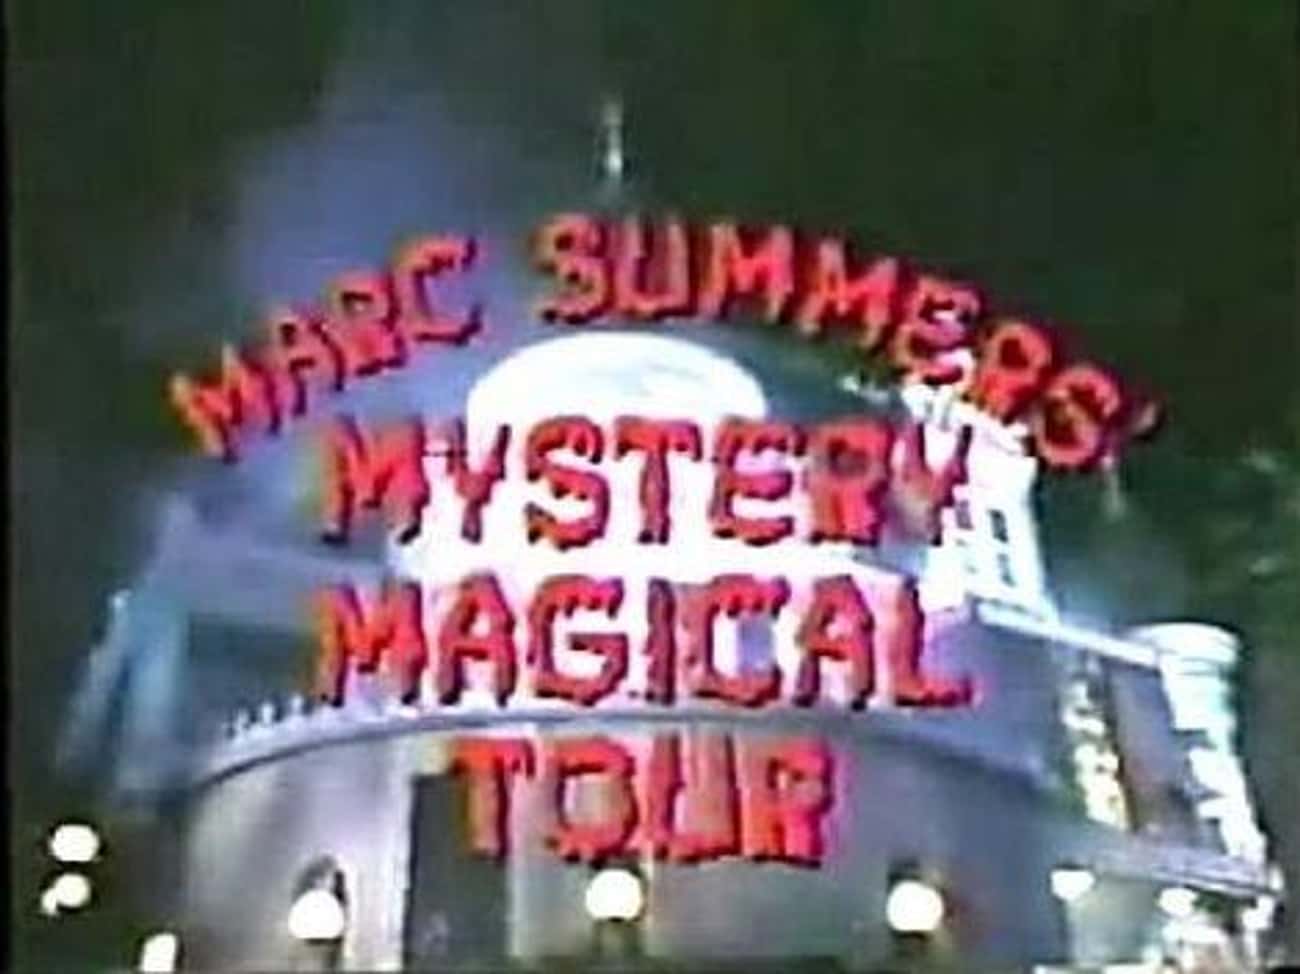 Marc Summers' Mystery Magical Tour